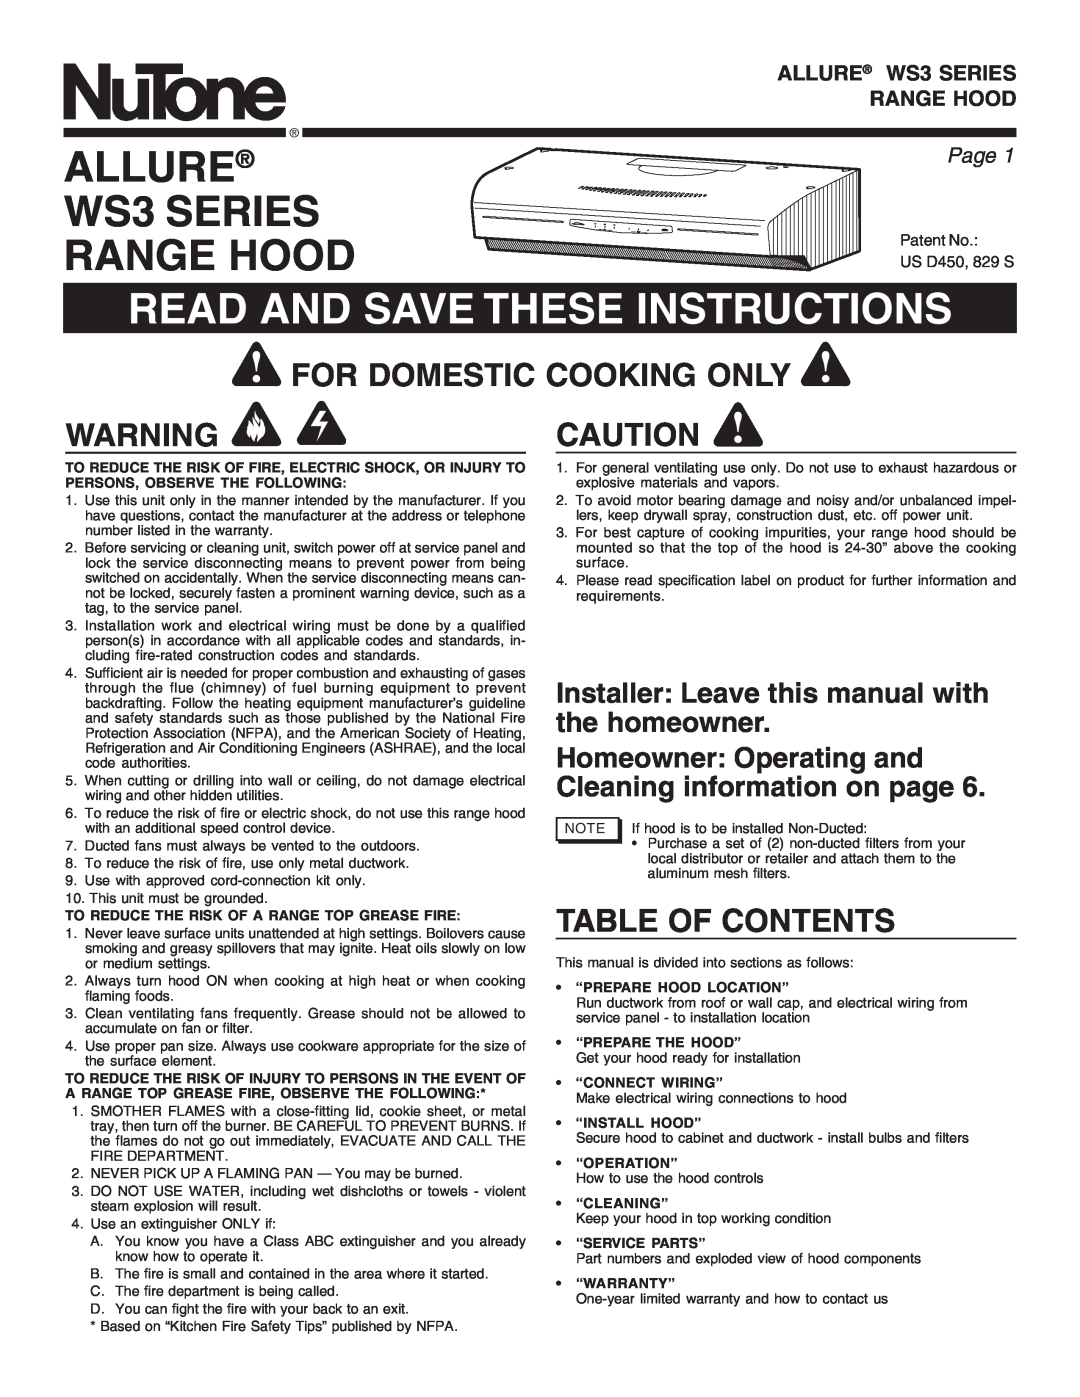 NuTone manual ALLURE WS3 SERIES RANGE HOOD, Read And Save These Instructions, For Domestic Cooking Only, Page 